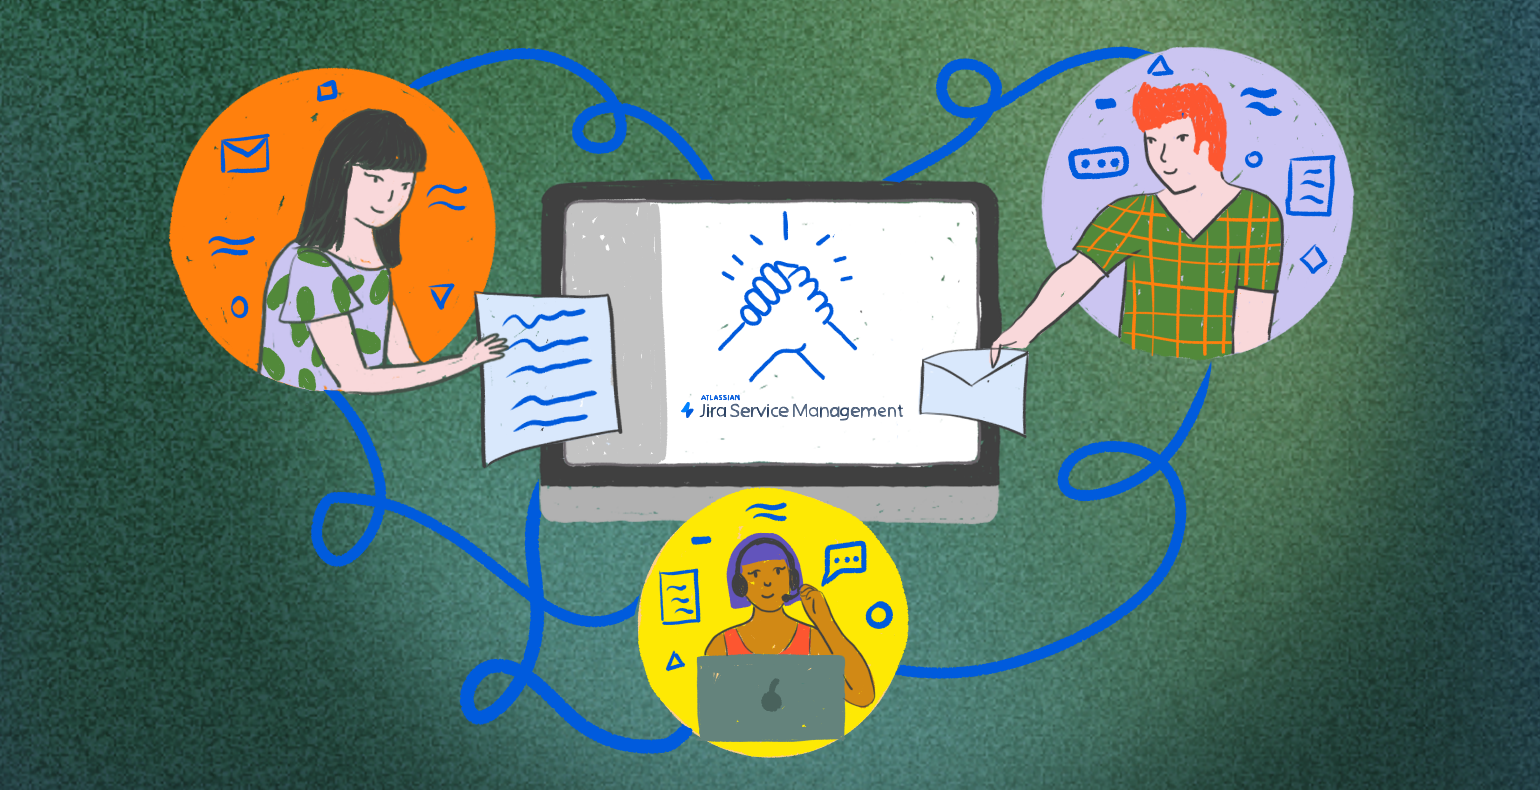 Reporters and agents who communicate through Jira Service Management